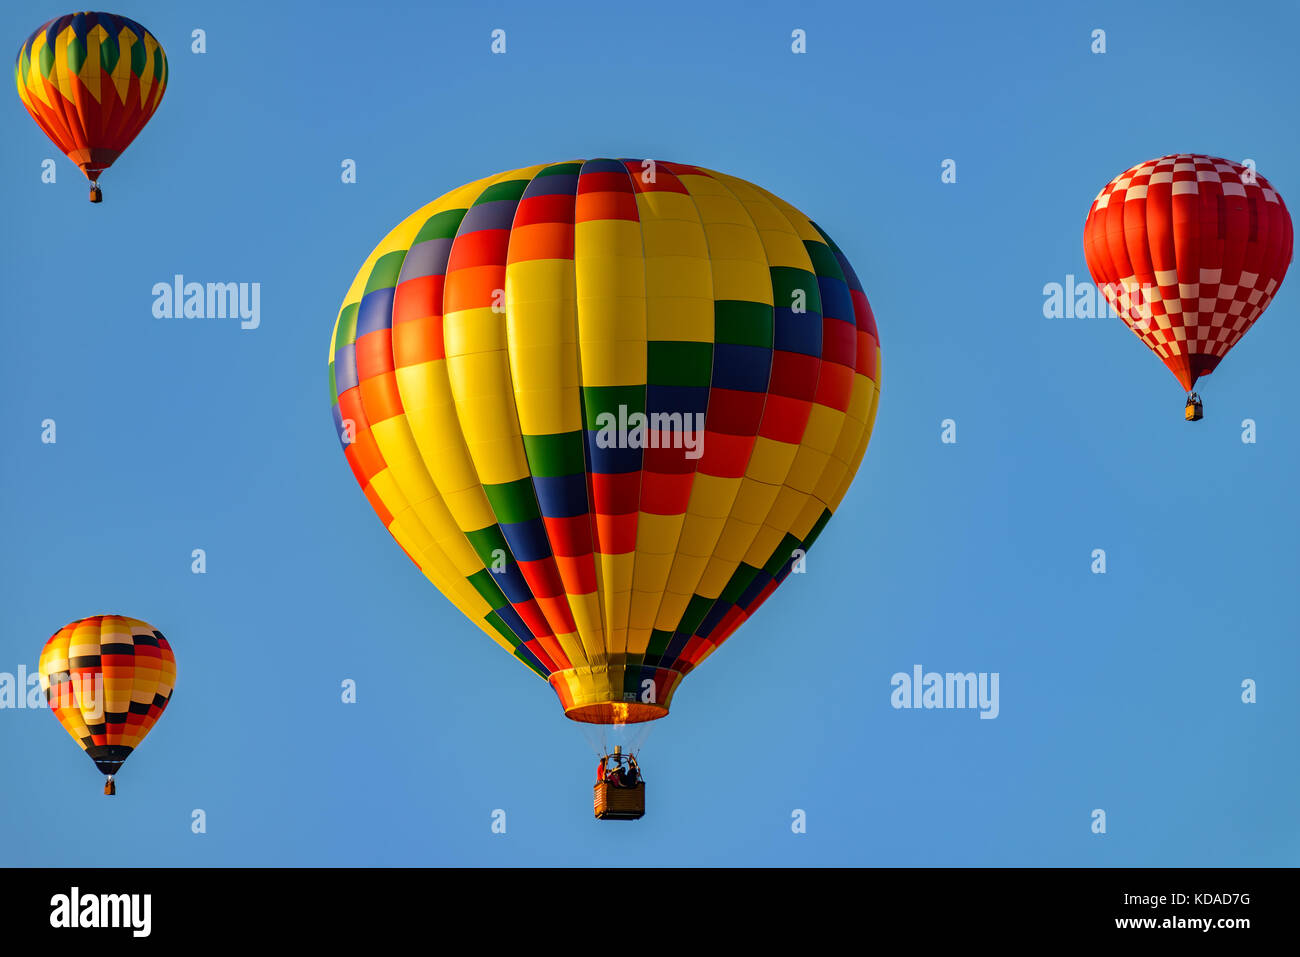 Colorful hot air balloons against blue sky Stock Photo